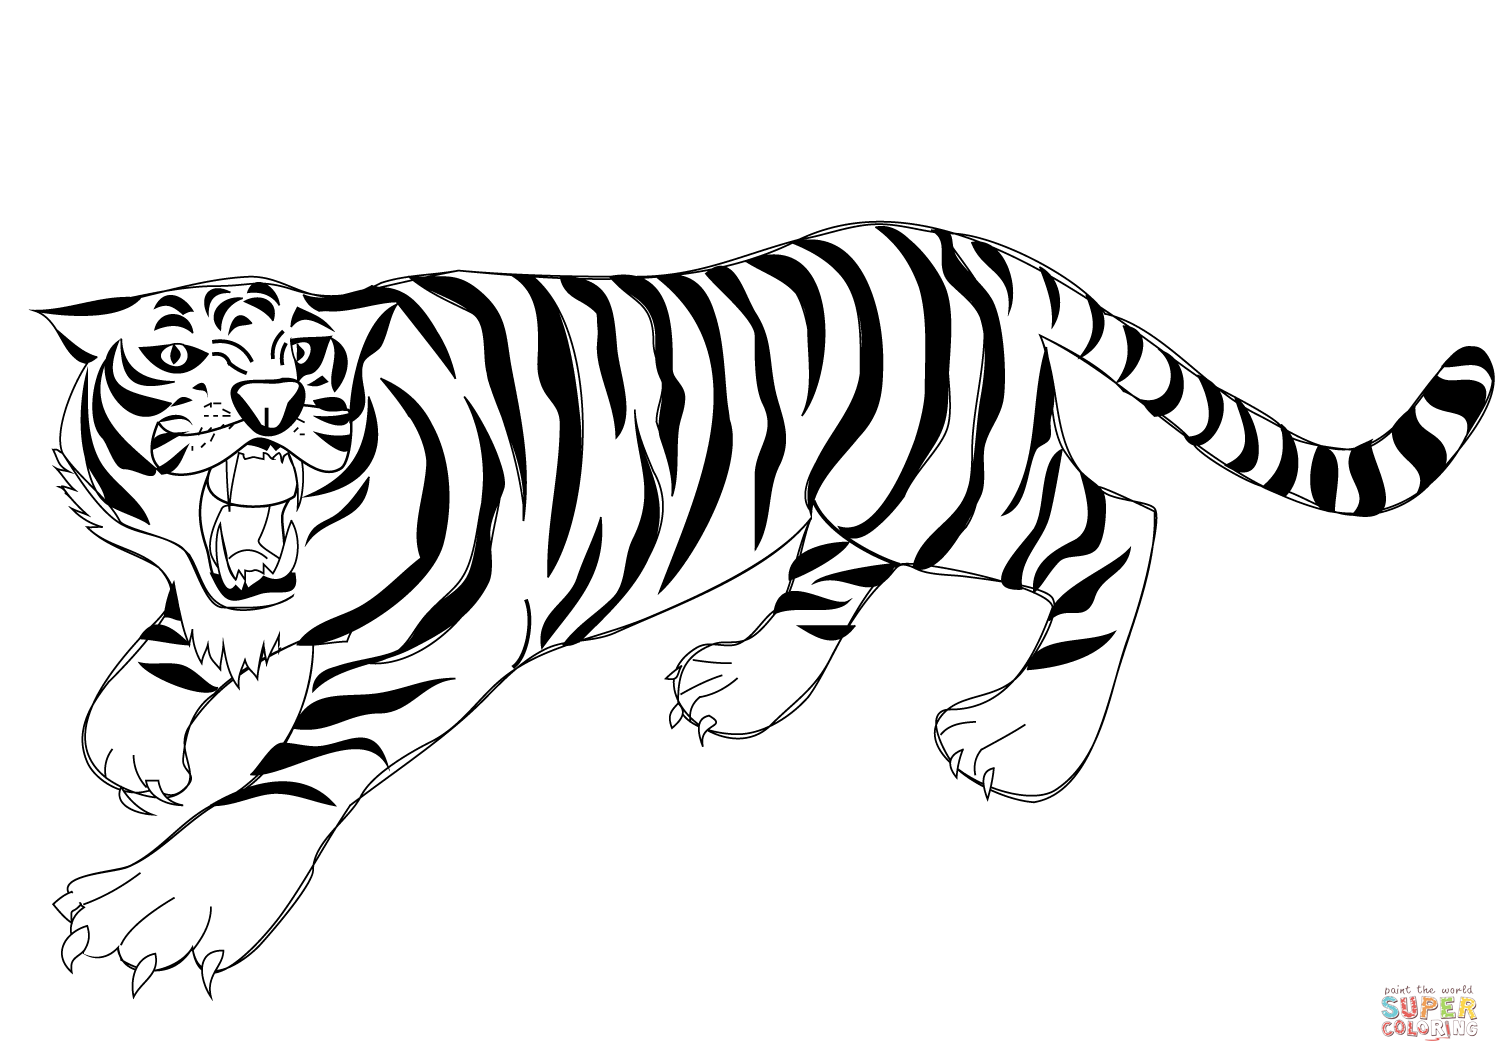 Roaring tiger coloring page free printable coloring pages